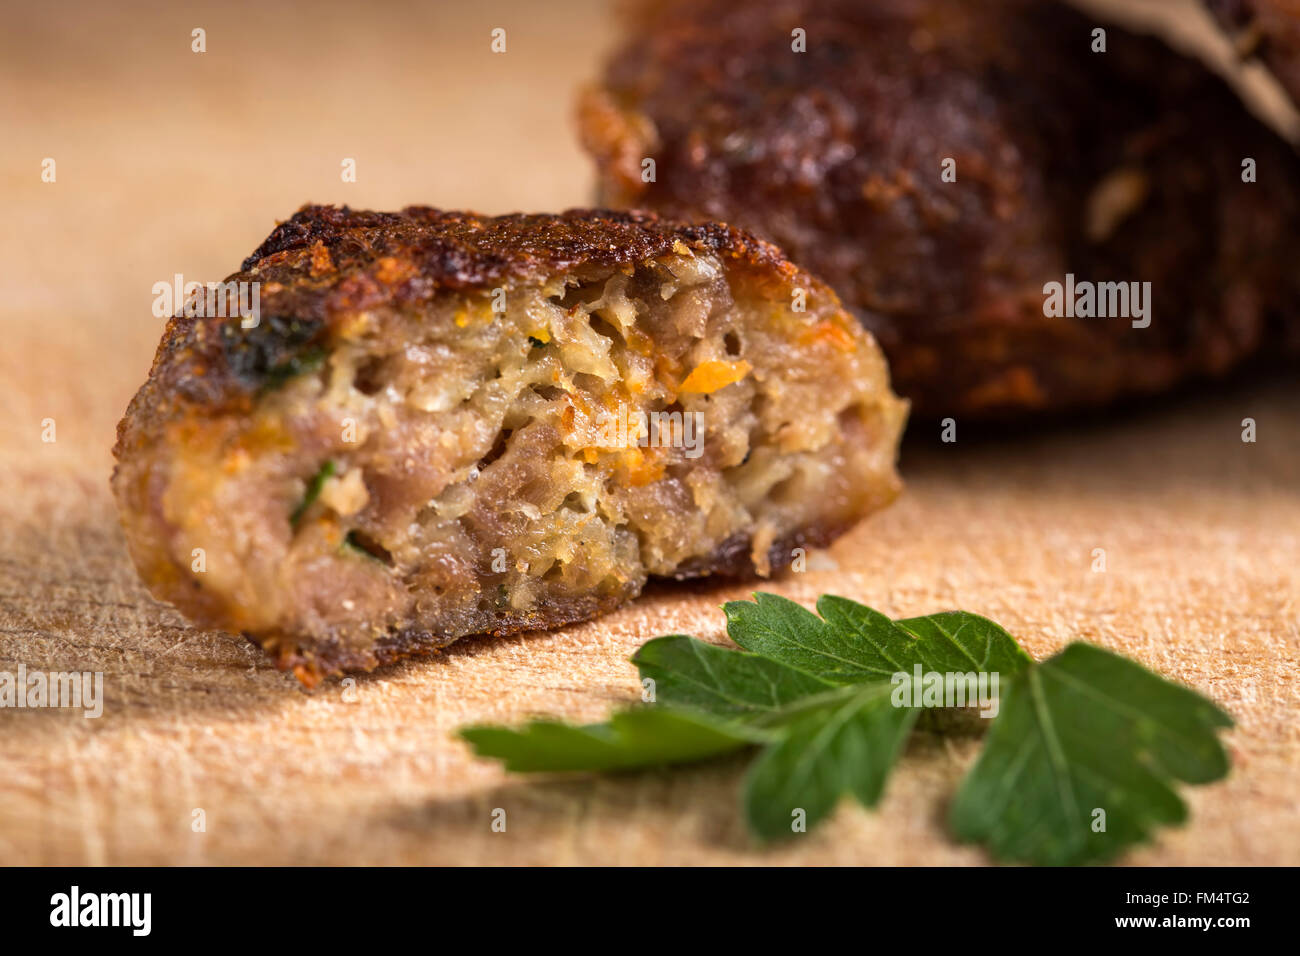 Close up of Romanian meatballs called 'chiftele' made with minced meat and parsley Stock Photo